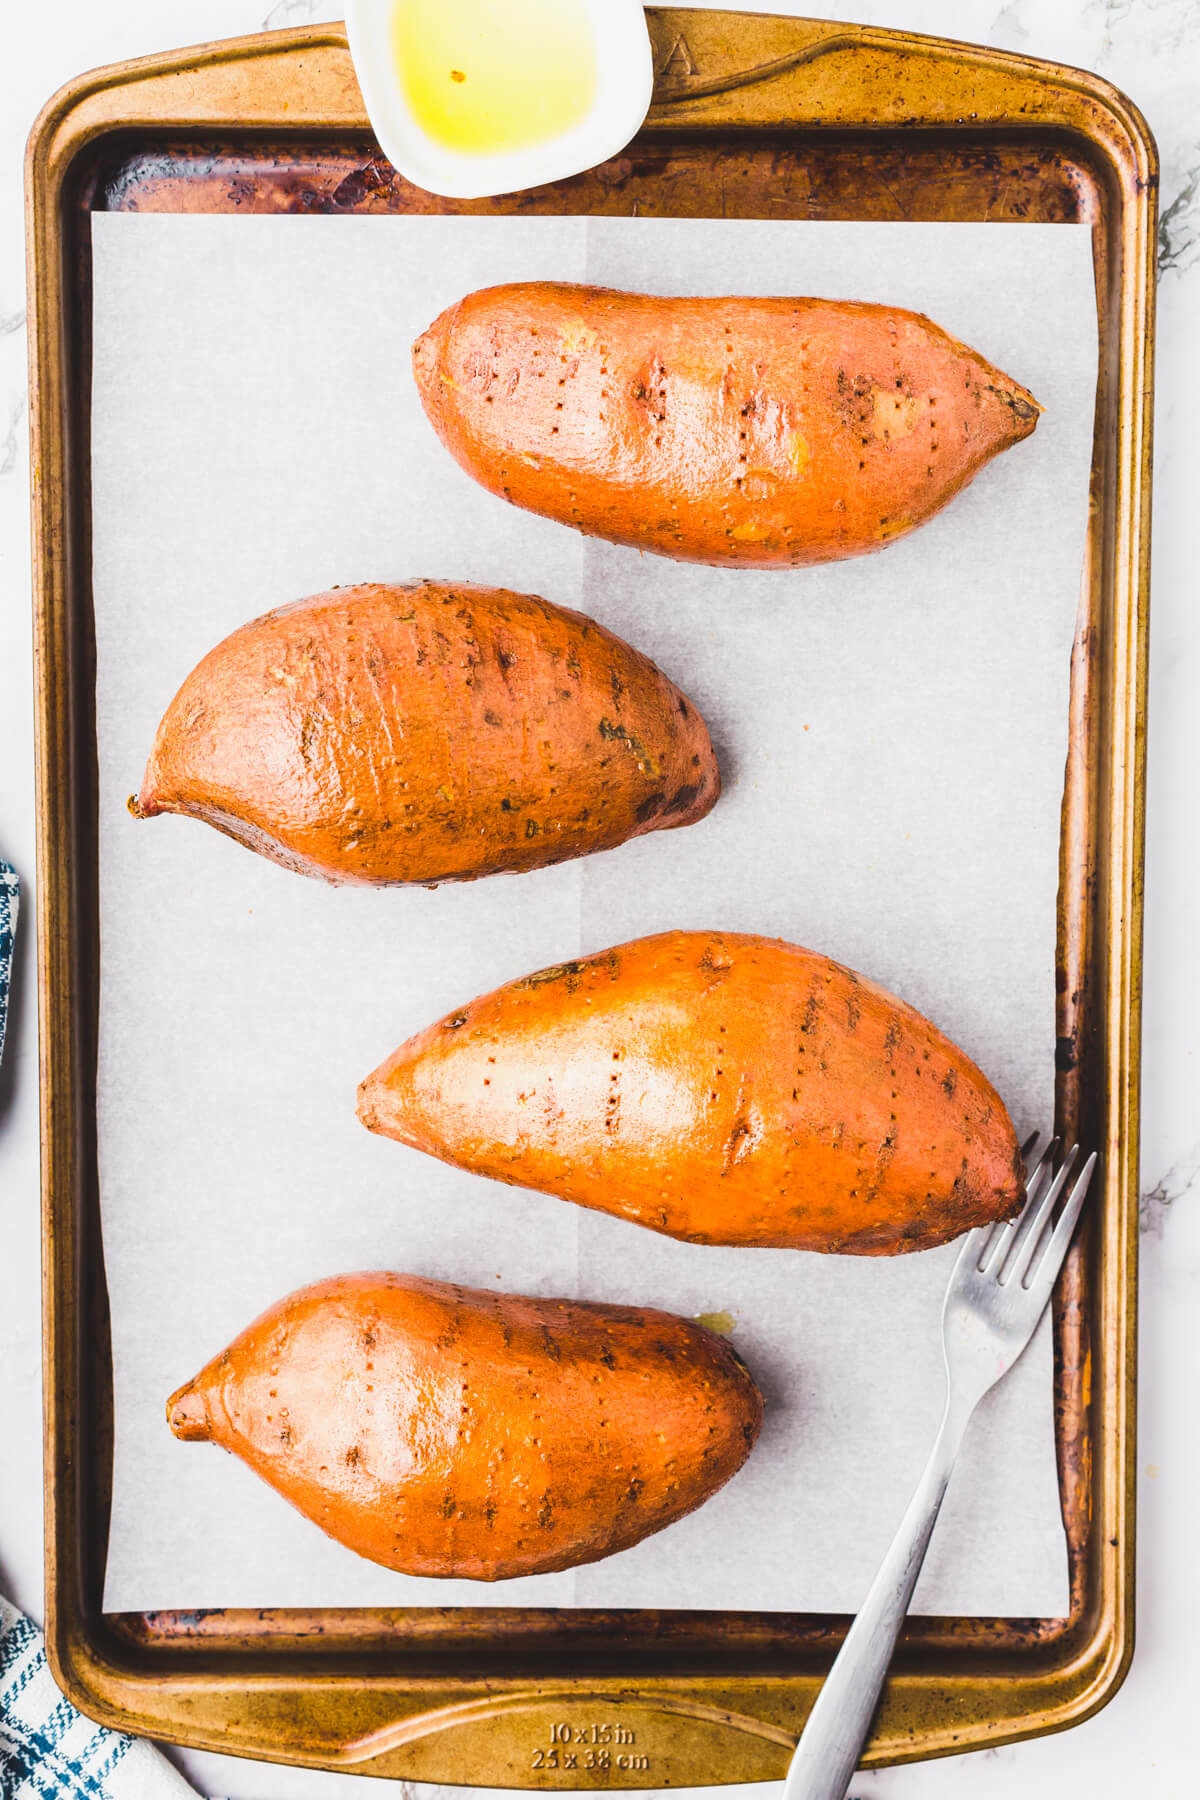 Four sweet potatoes on a parchment lined baking sheet.